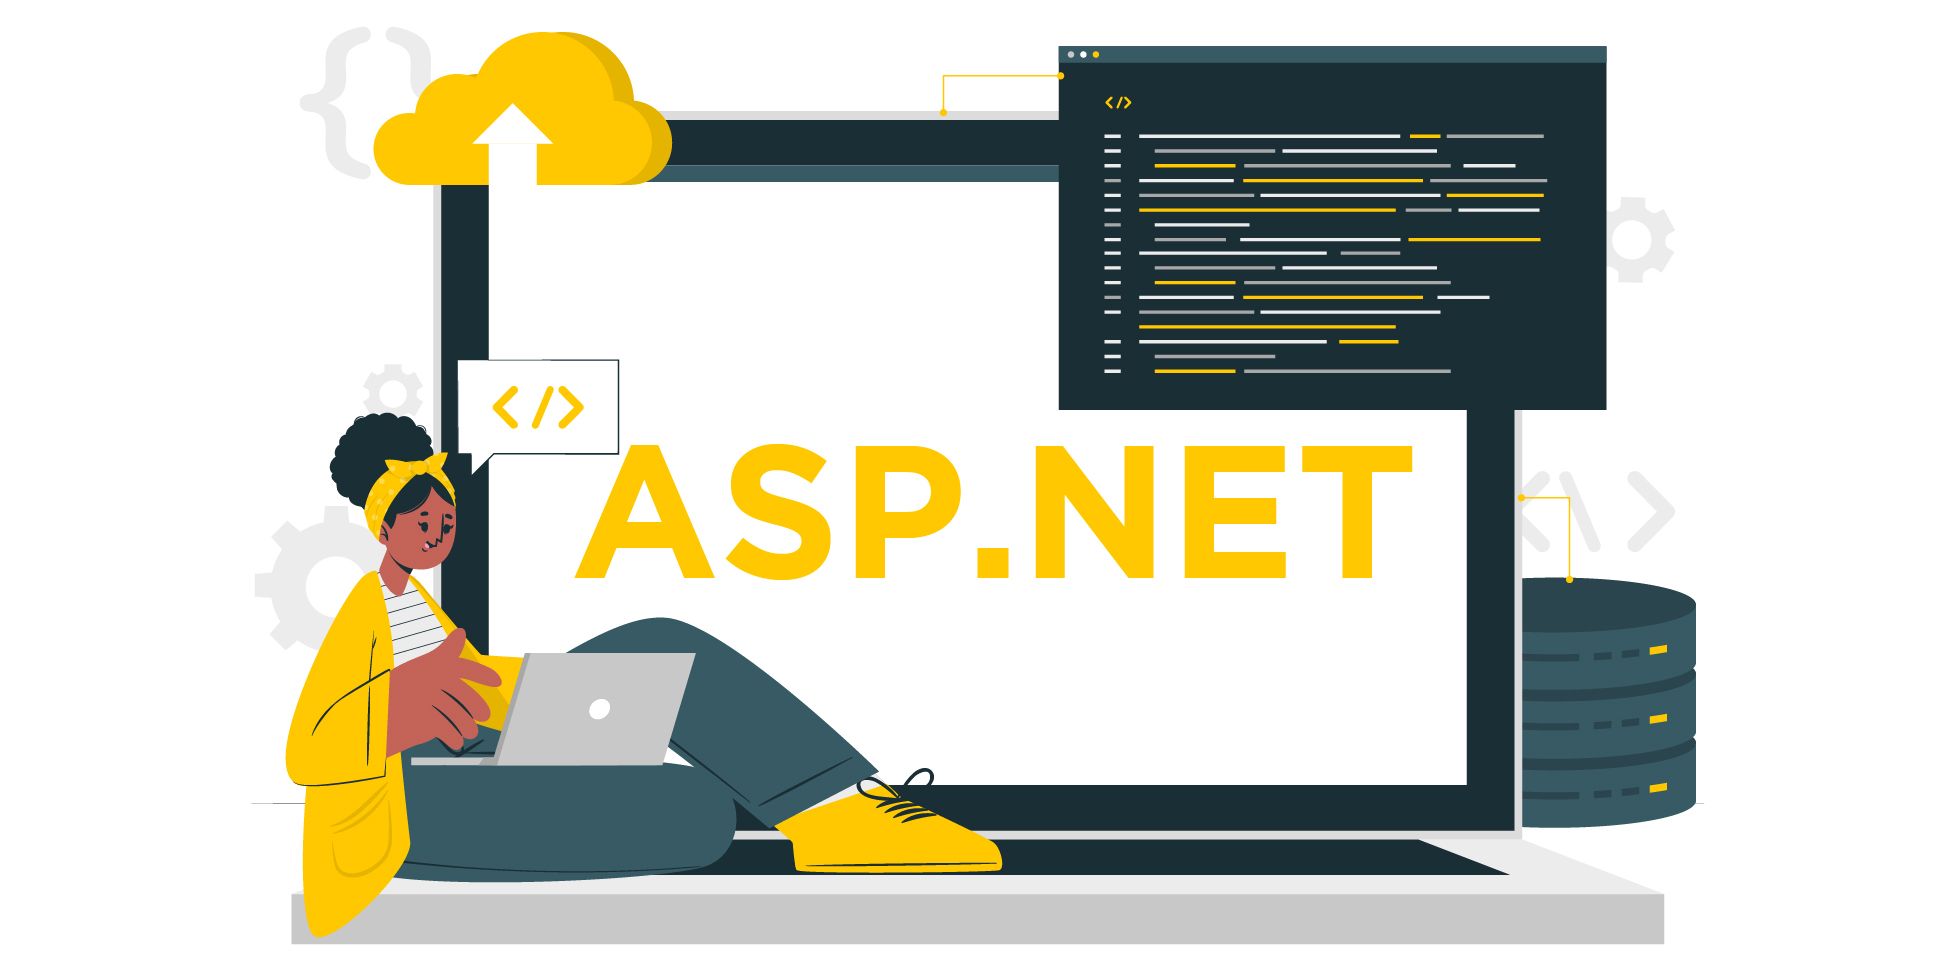 What skills must ASP.NET Developers have?